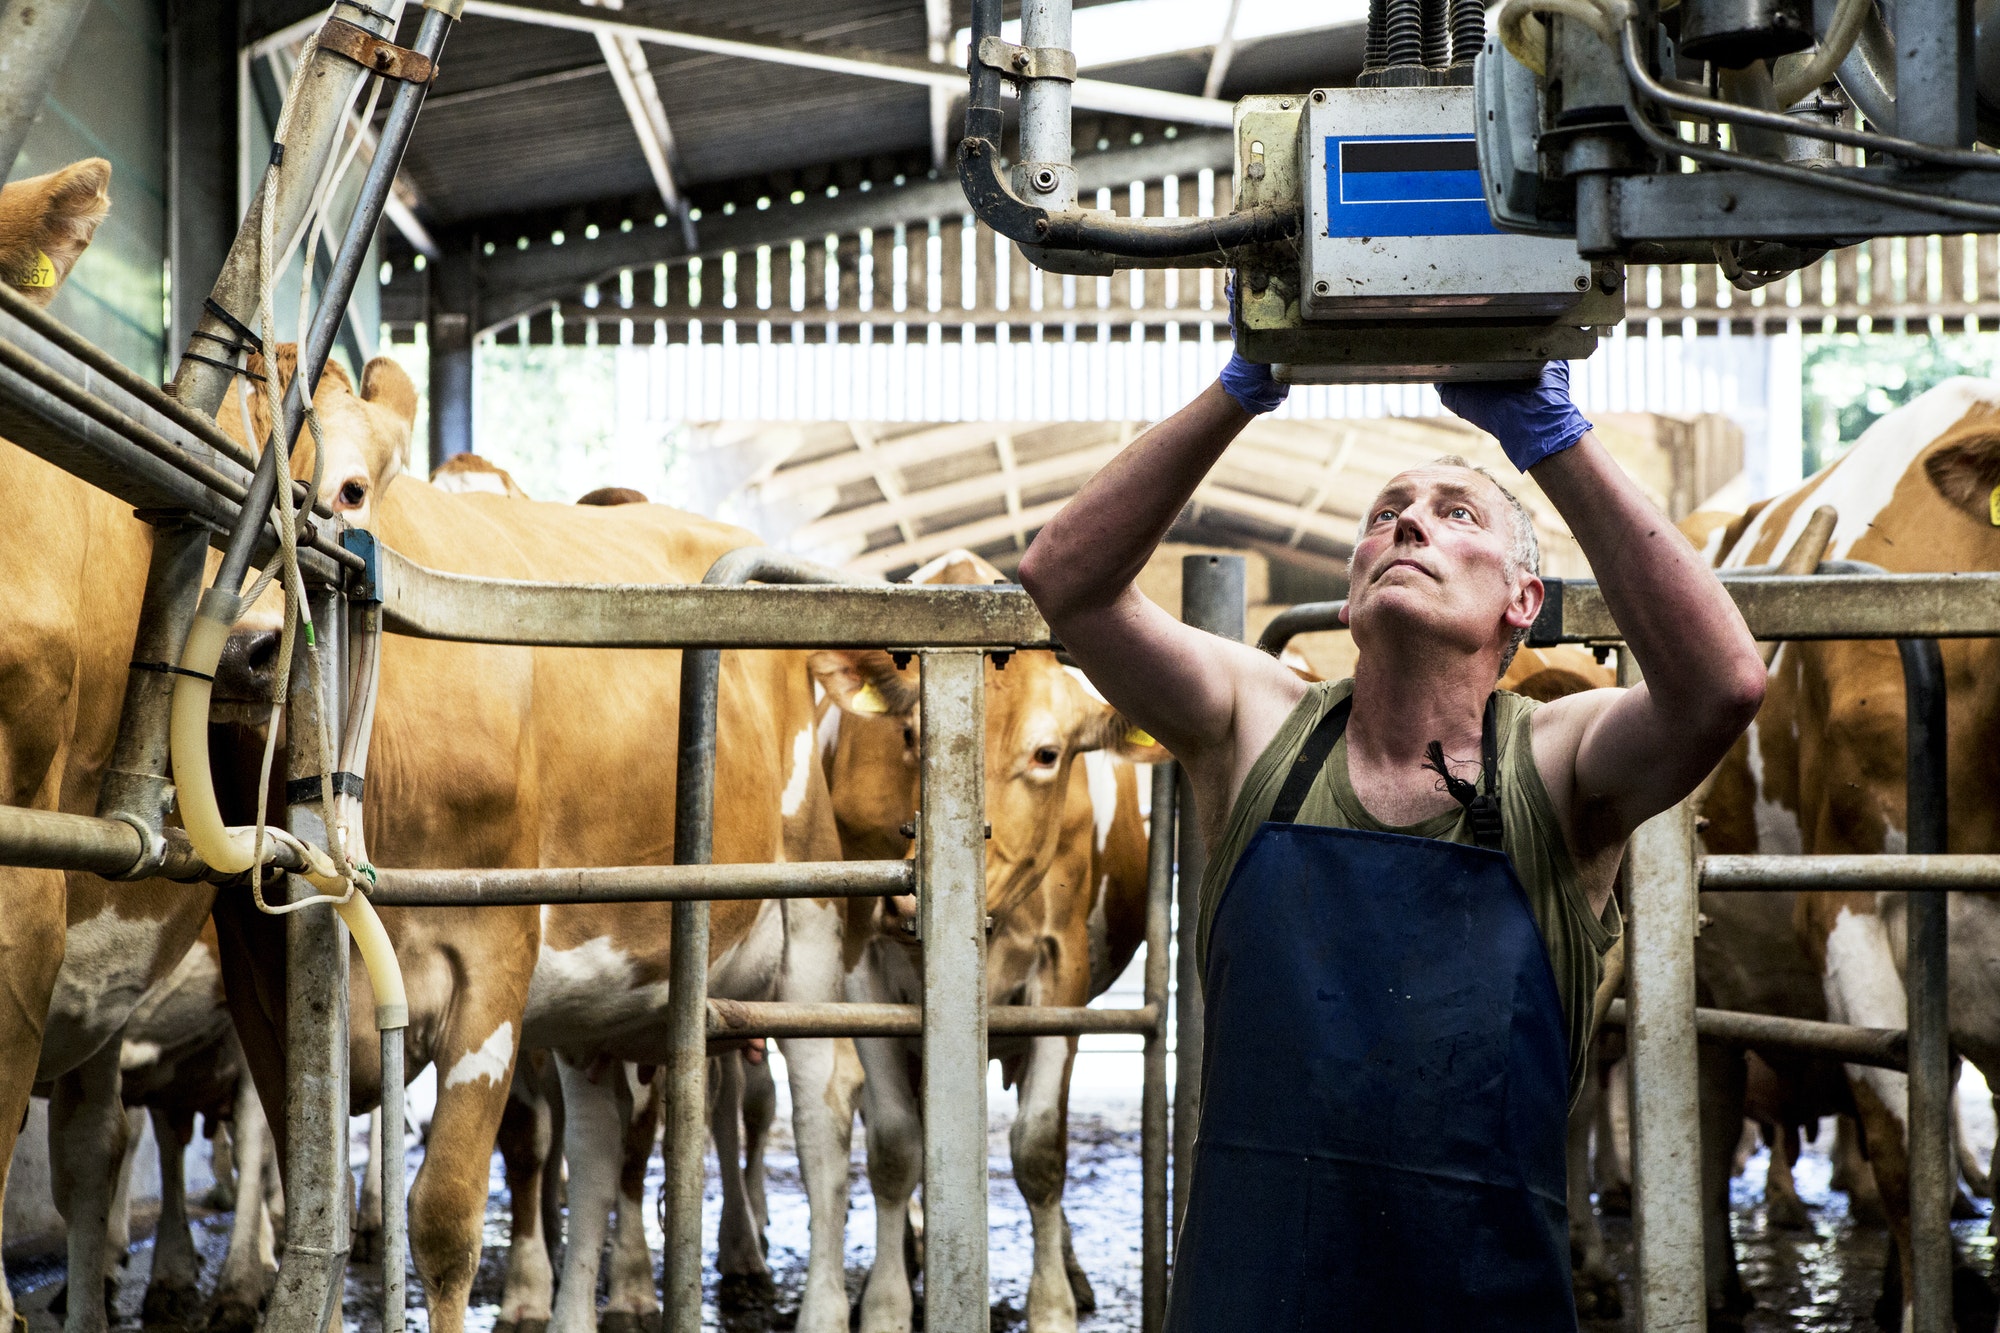 man-wearing-apron-standing-in-a-milking-shed-milking-guernsey-cows-.jpg